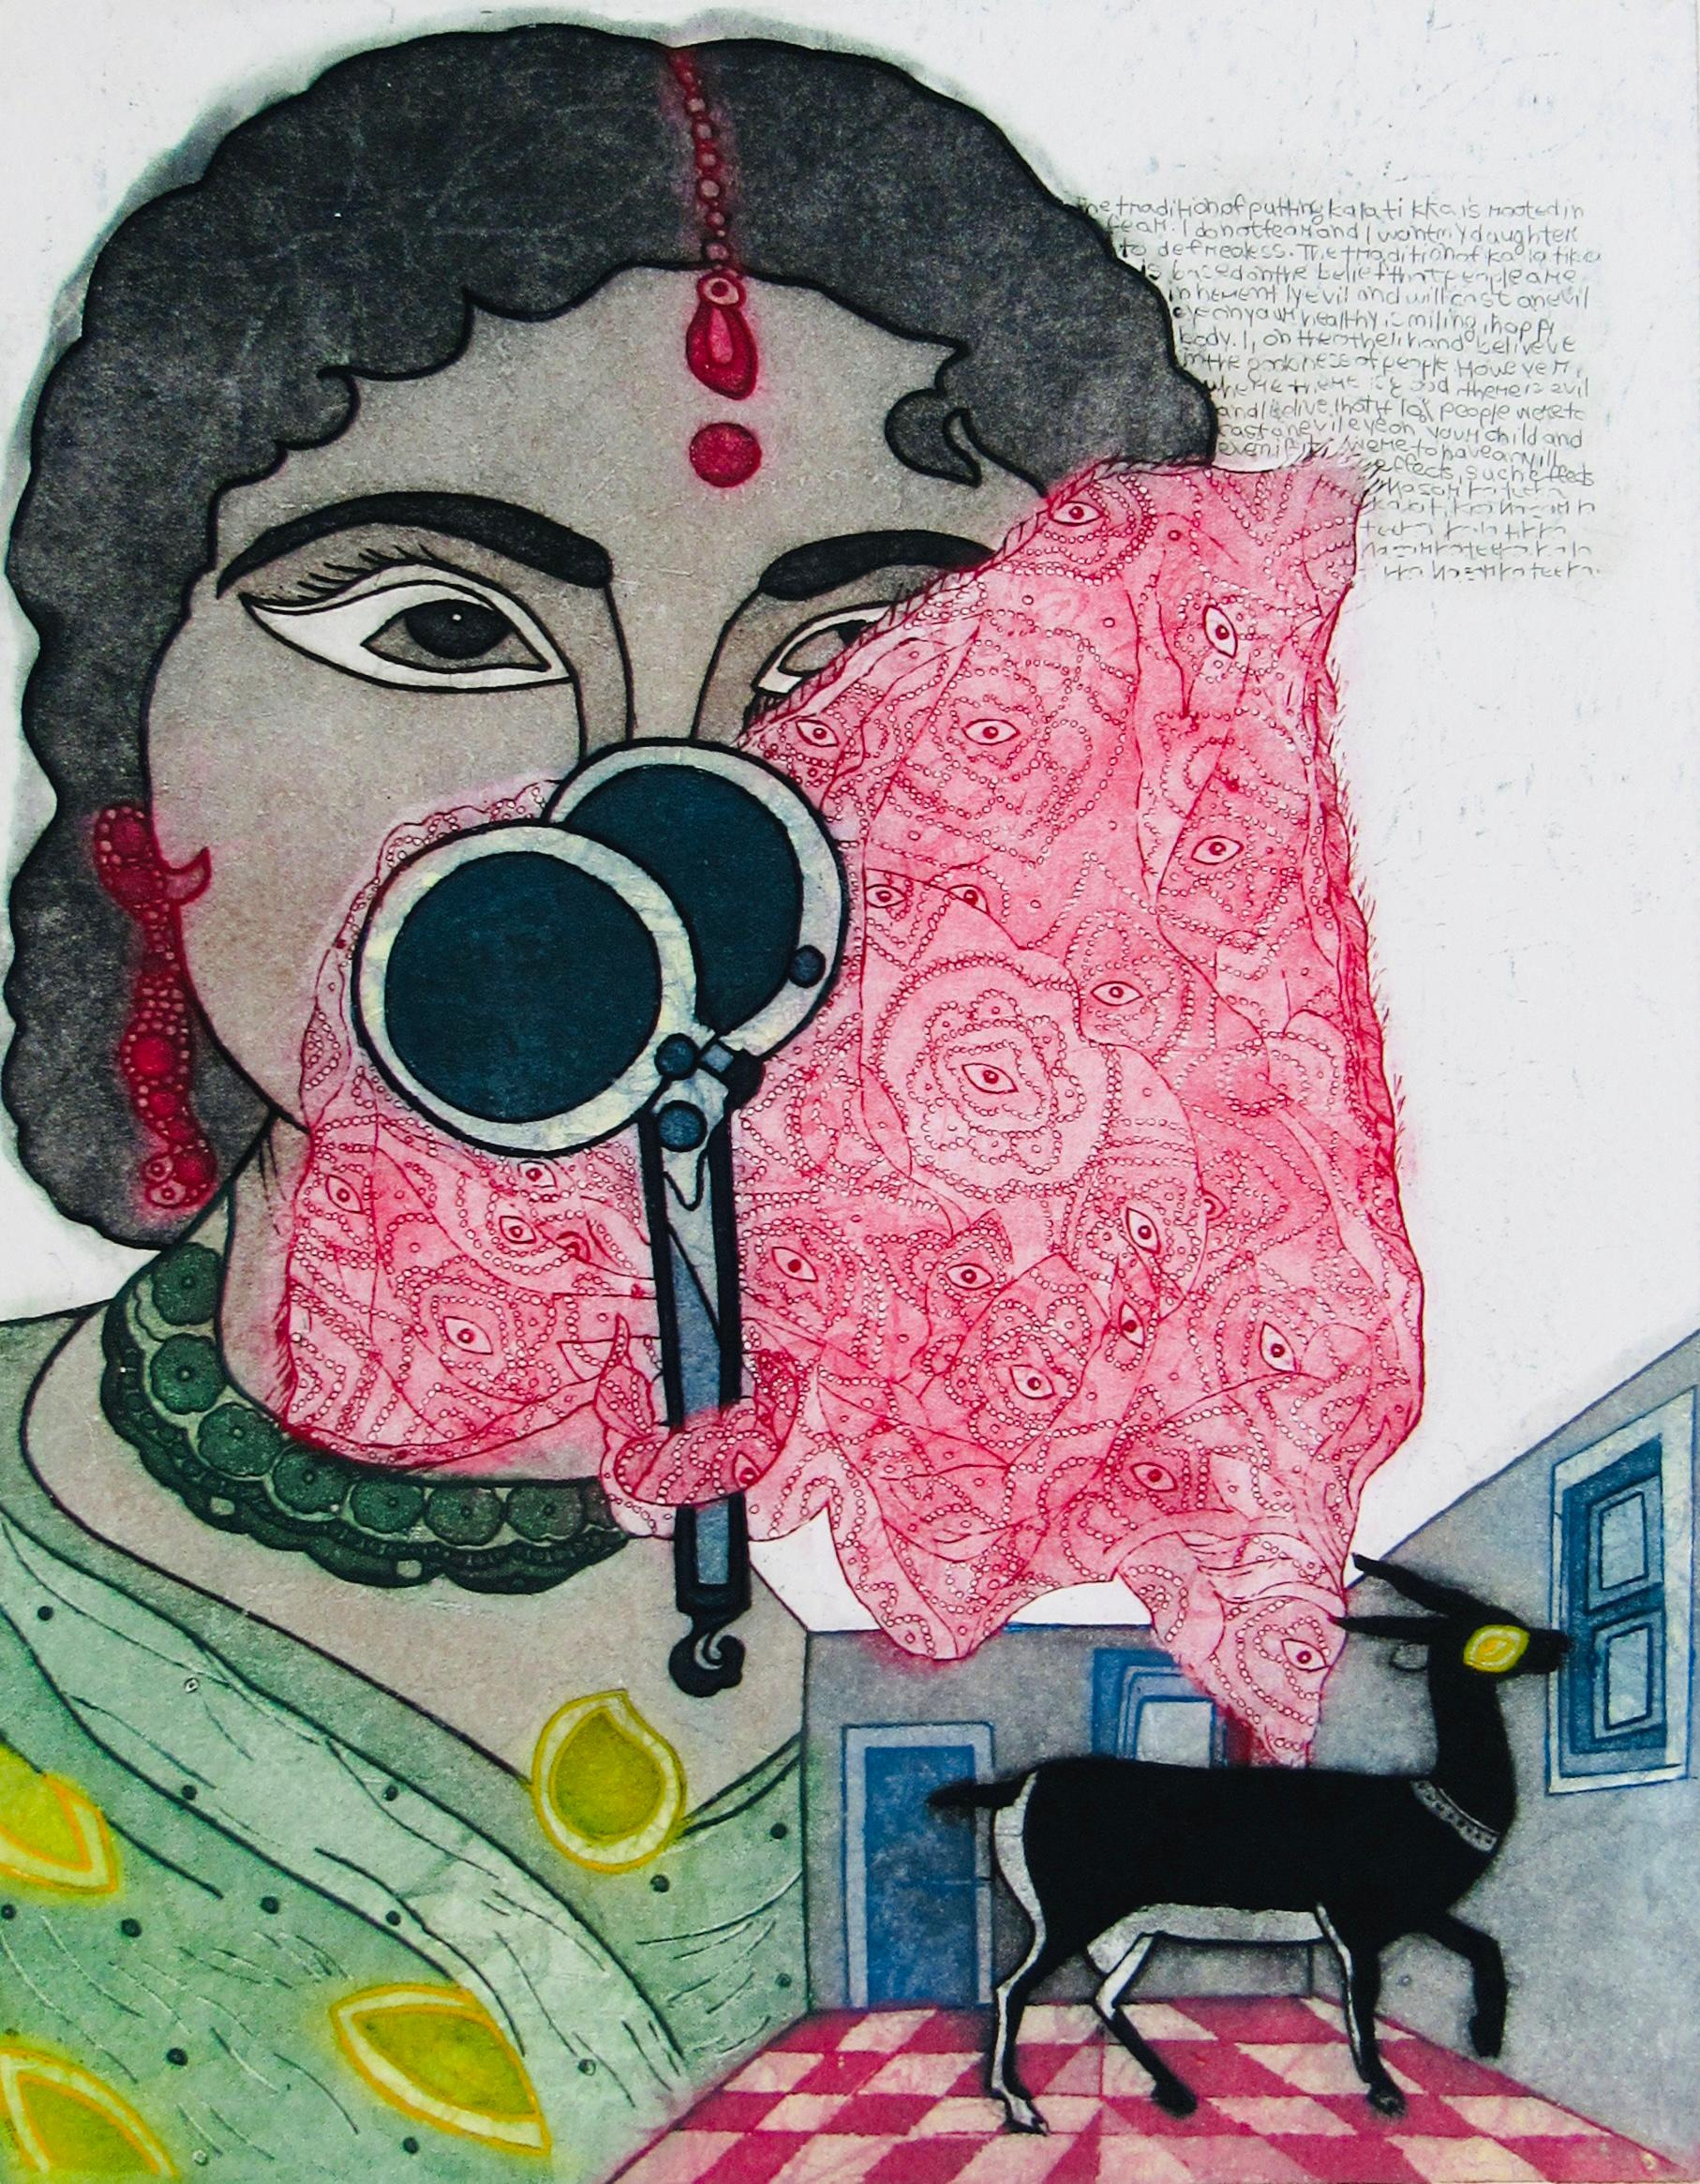 Compelling set of 5 etchings from an exciting new talent, Indian Artist Sonal Varshneya Ojha. The 5 works come from a series of 25 works, Edition 4/7. The full Edition is available on our 1stDibs store. Editions 1 and 2 have already sold, Edition 2